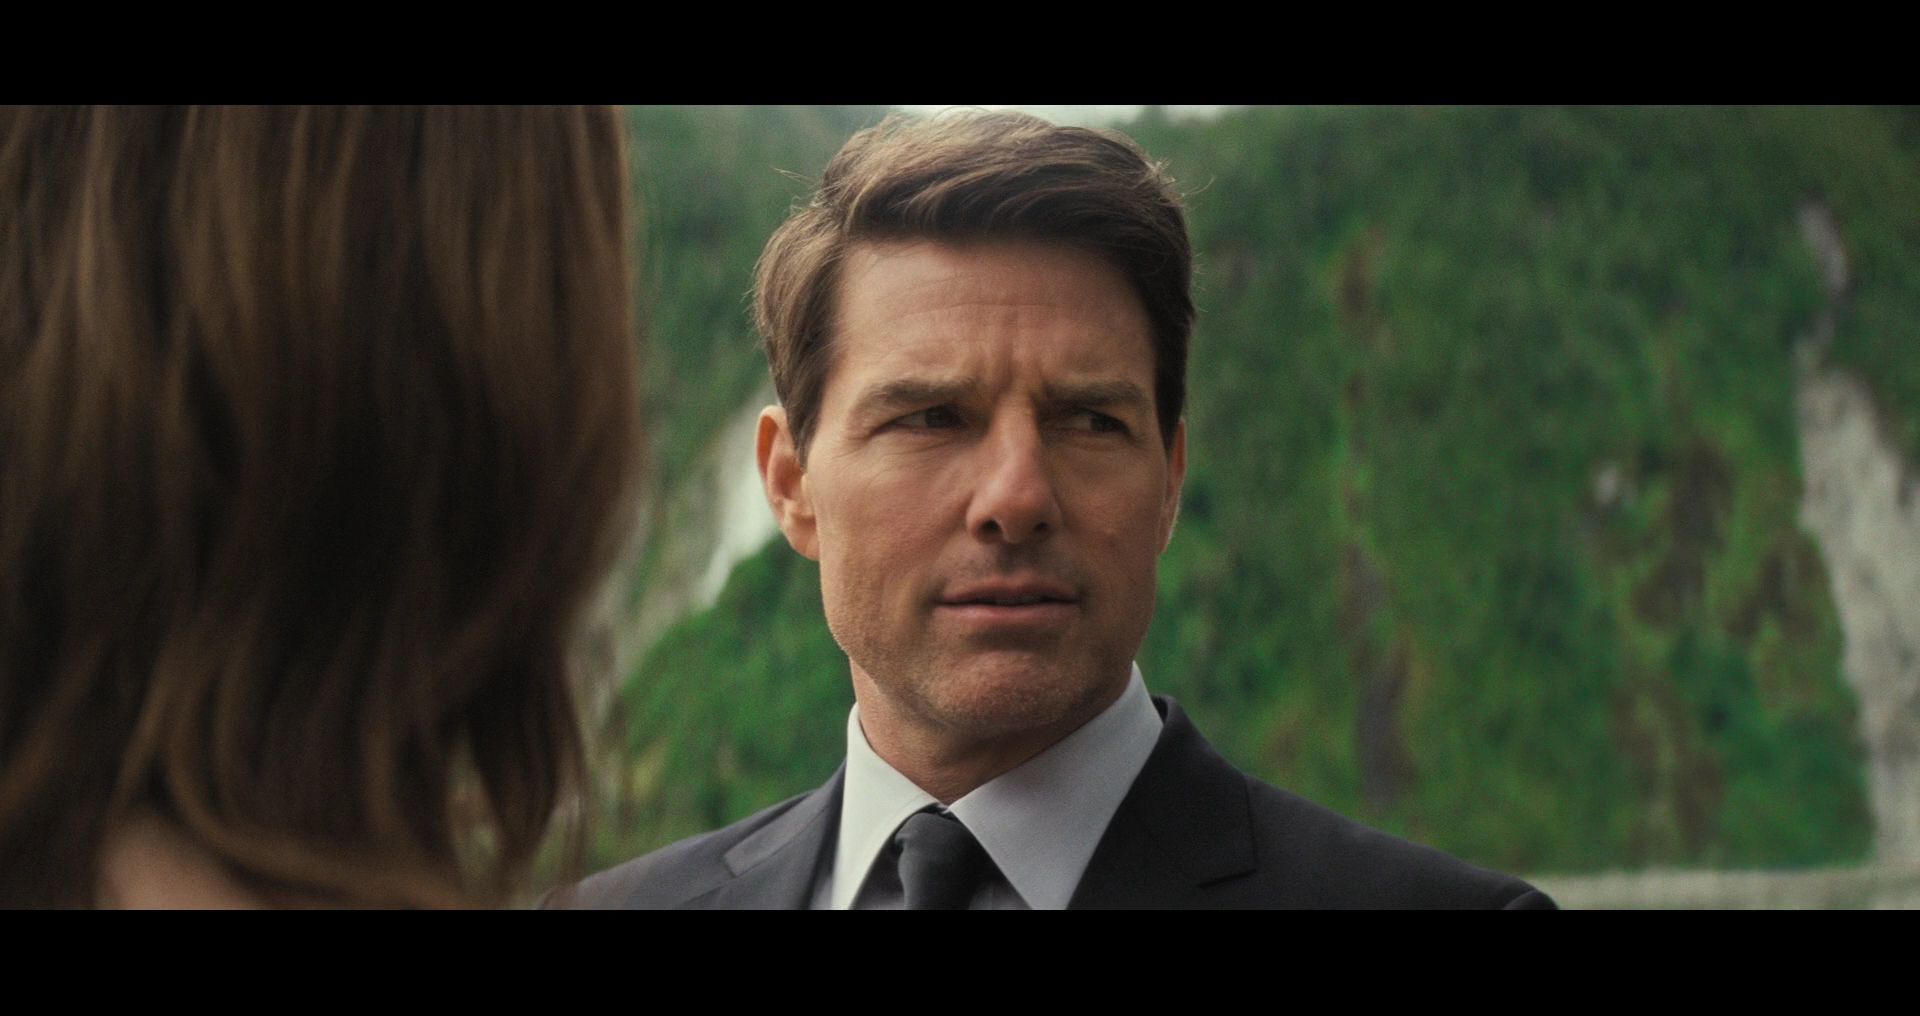 Mission-Impossible-Fallout-0026.jpg